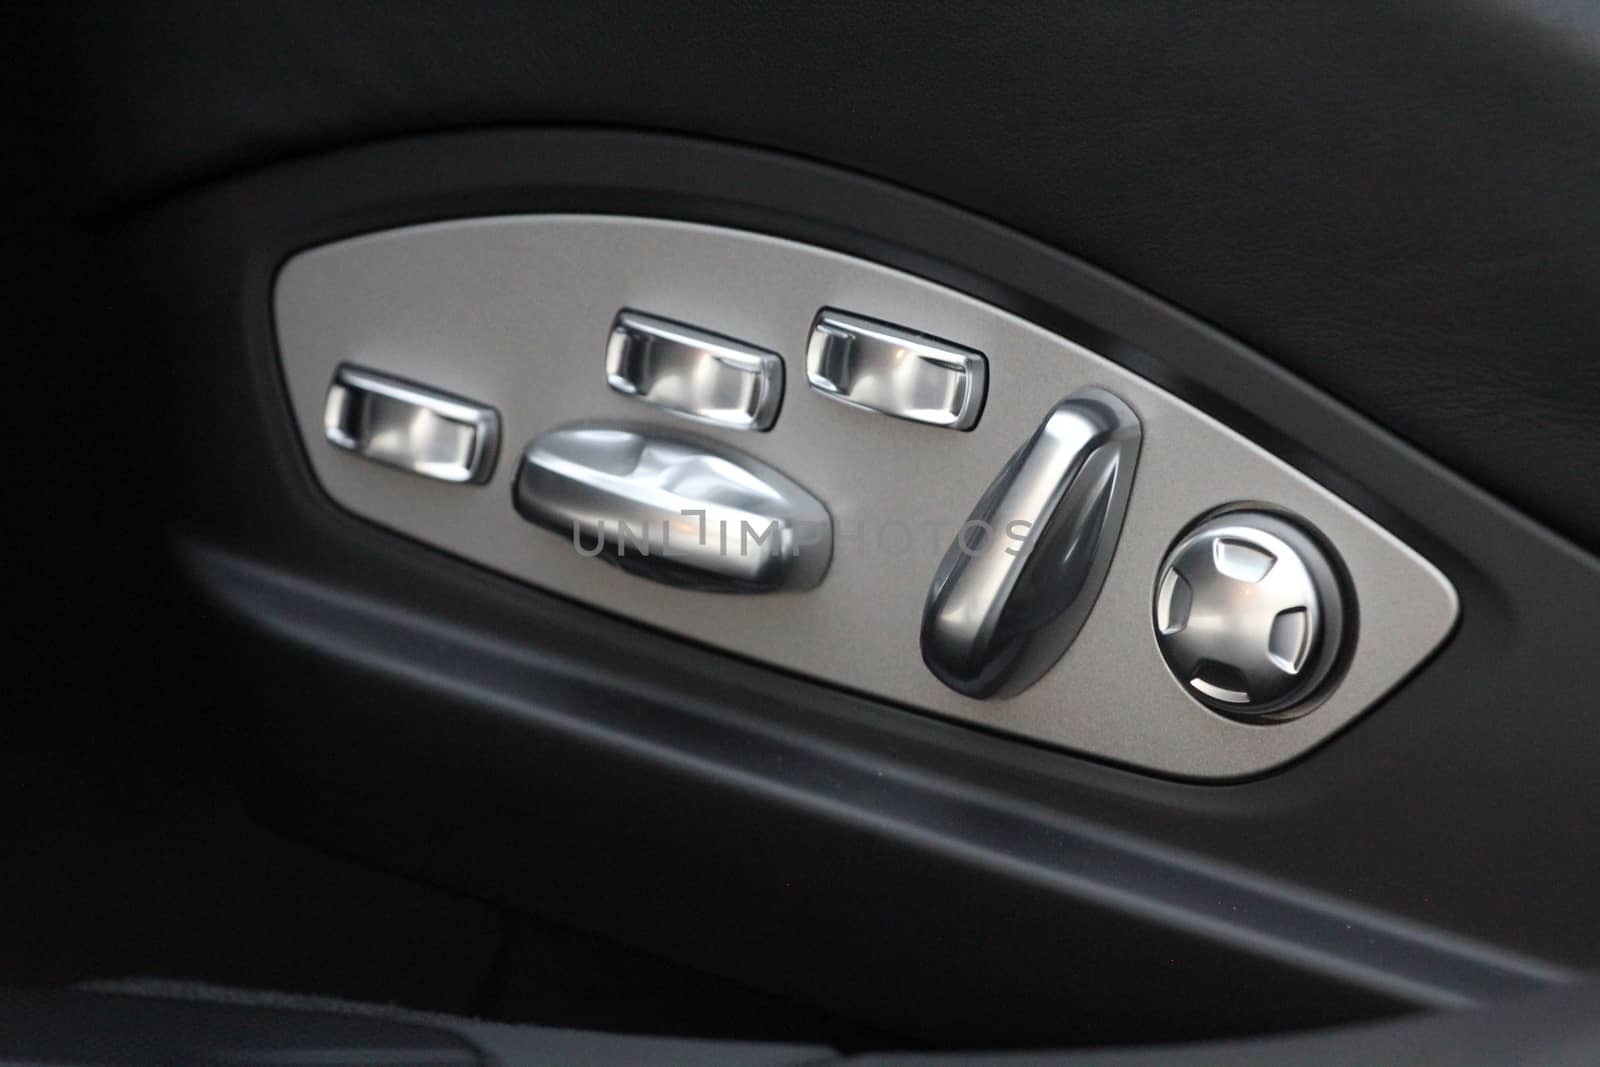 Buttons for adjusting seat position. Car interior detail